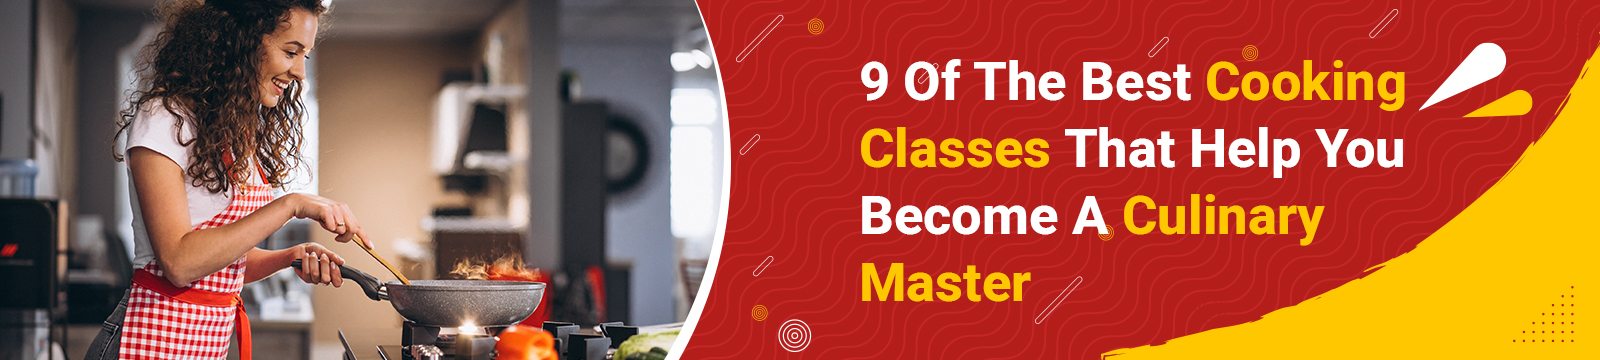 9 Of The Best Cooking Classes That Help You Become A Culinary Master